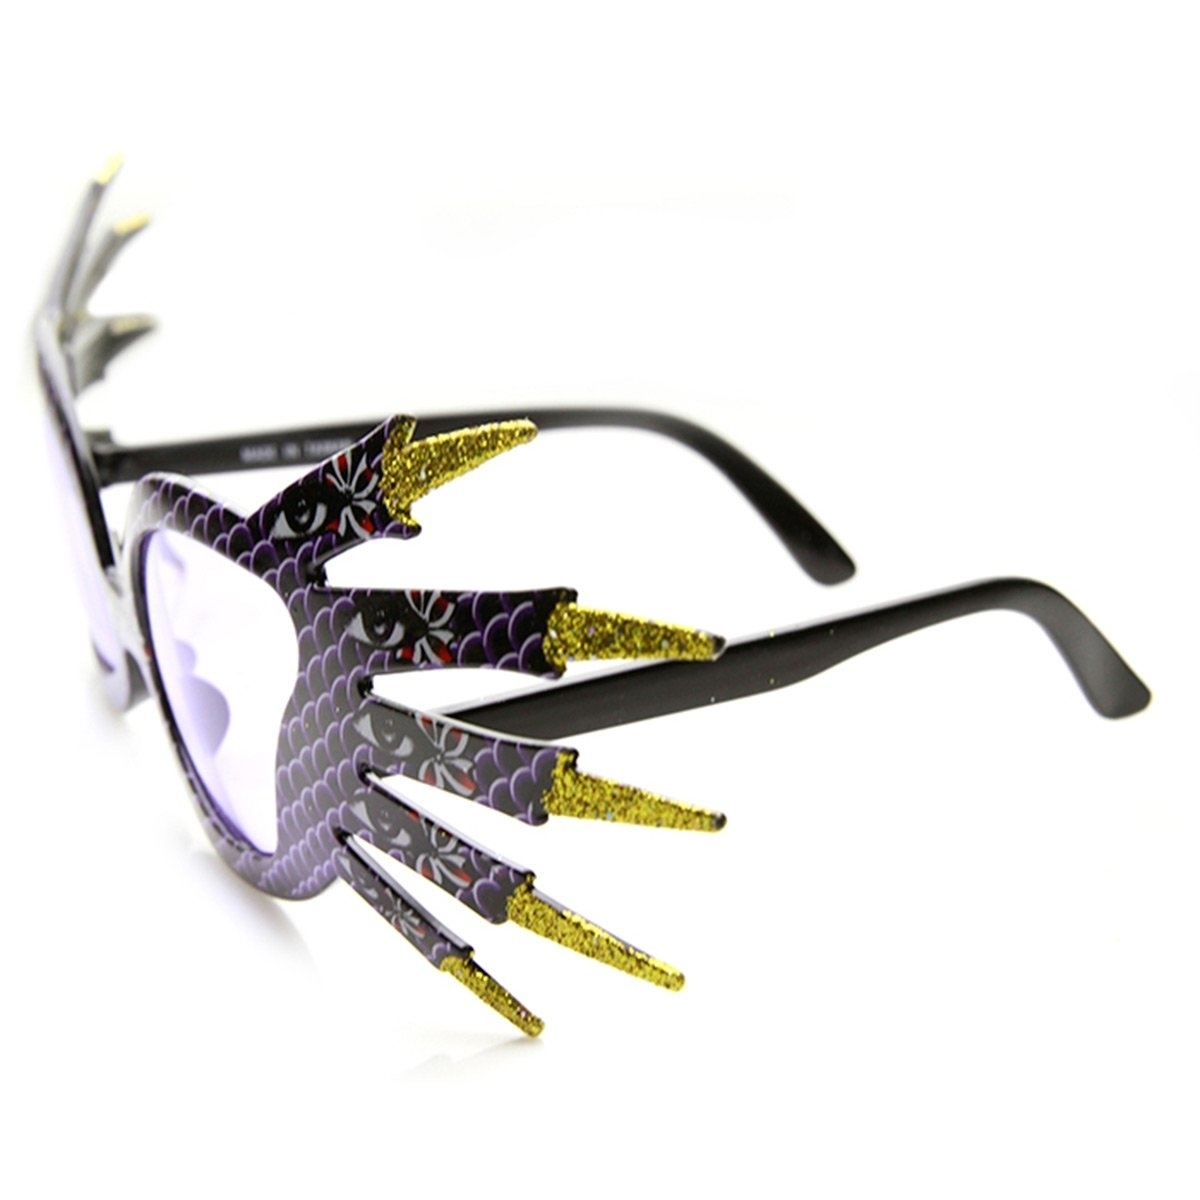 Dragon Claws Hydra Scales Monster Novelty Party Sunglasses - Purple Purple